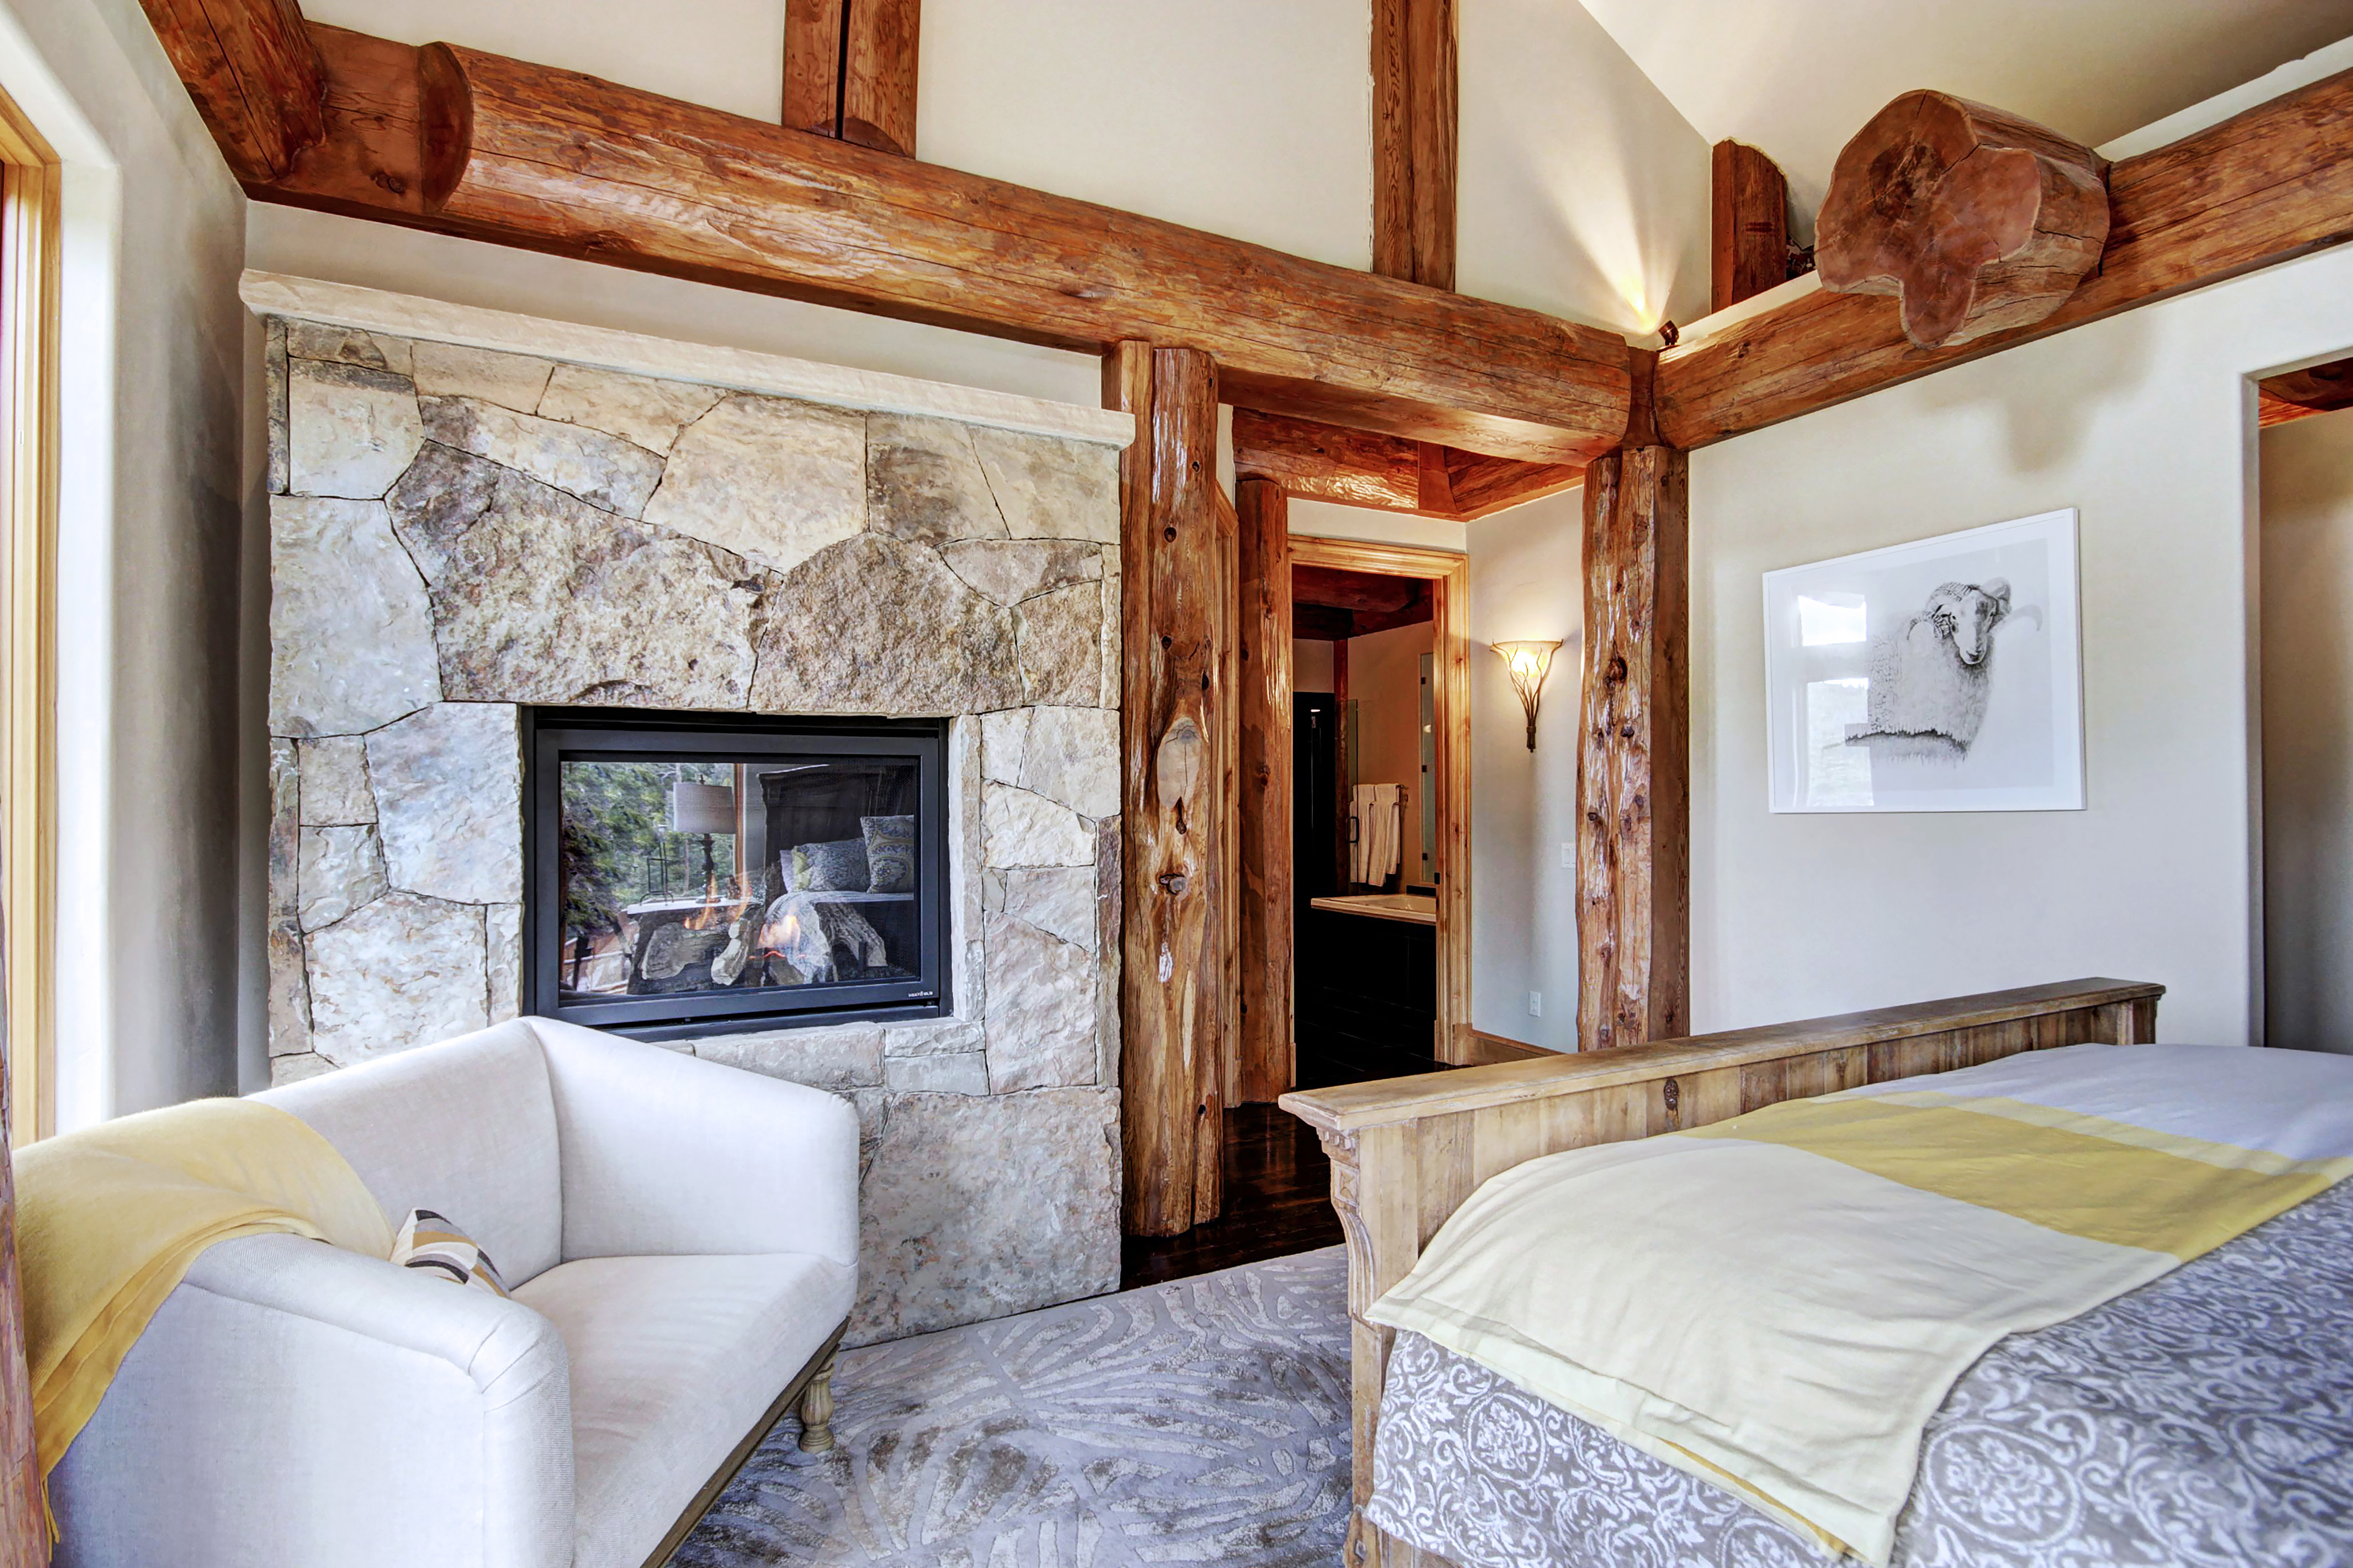 Main level master bedroom with en-suite bathroom and private fireplace - Clowsgill Holme Breckenridge Vacation Rental